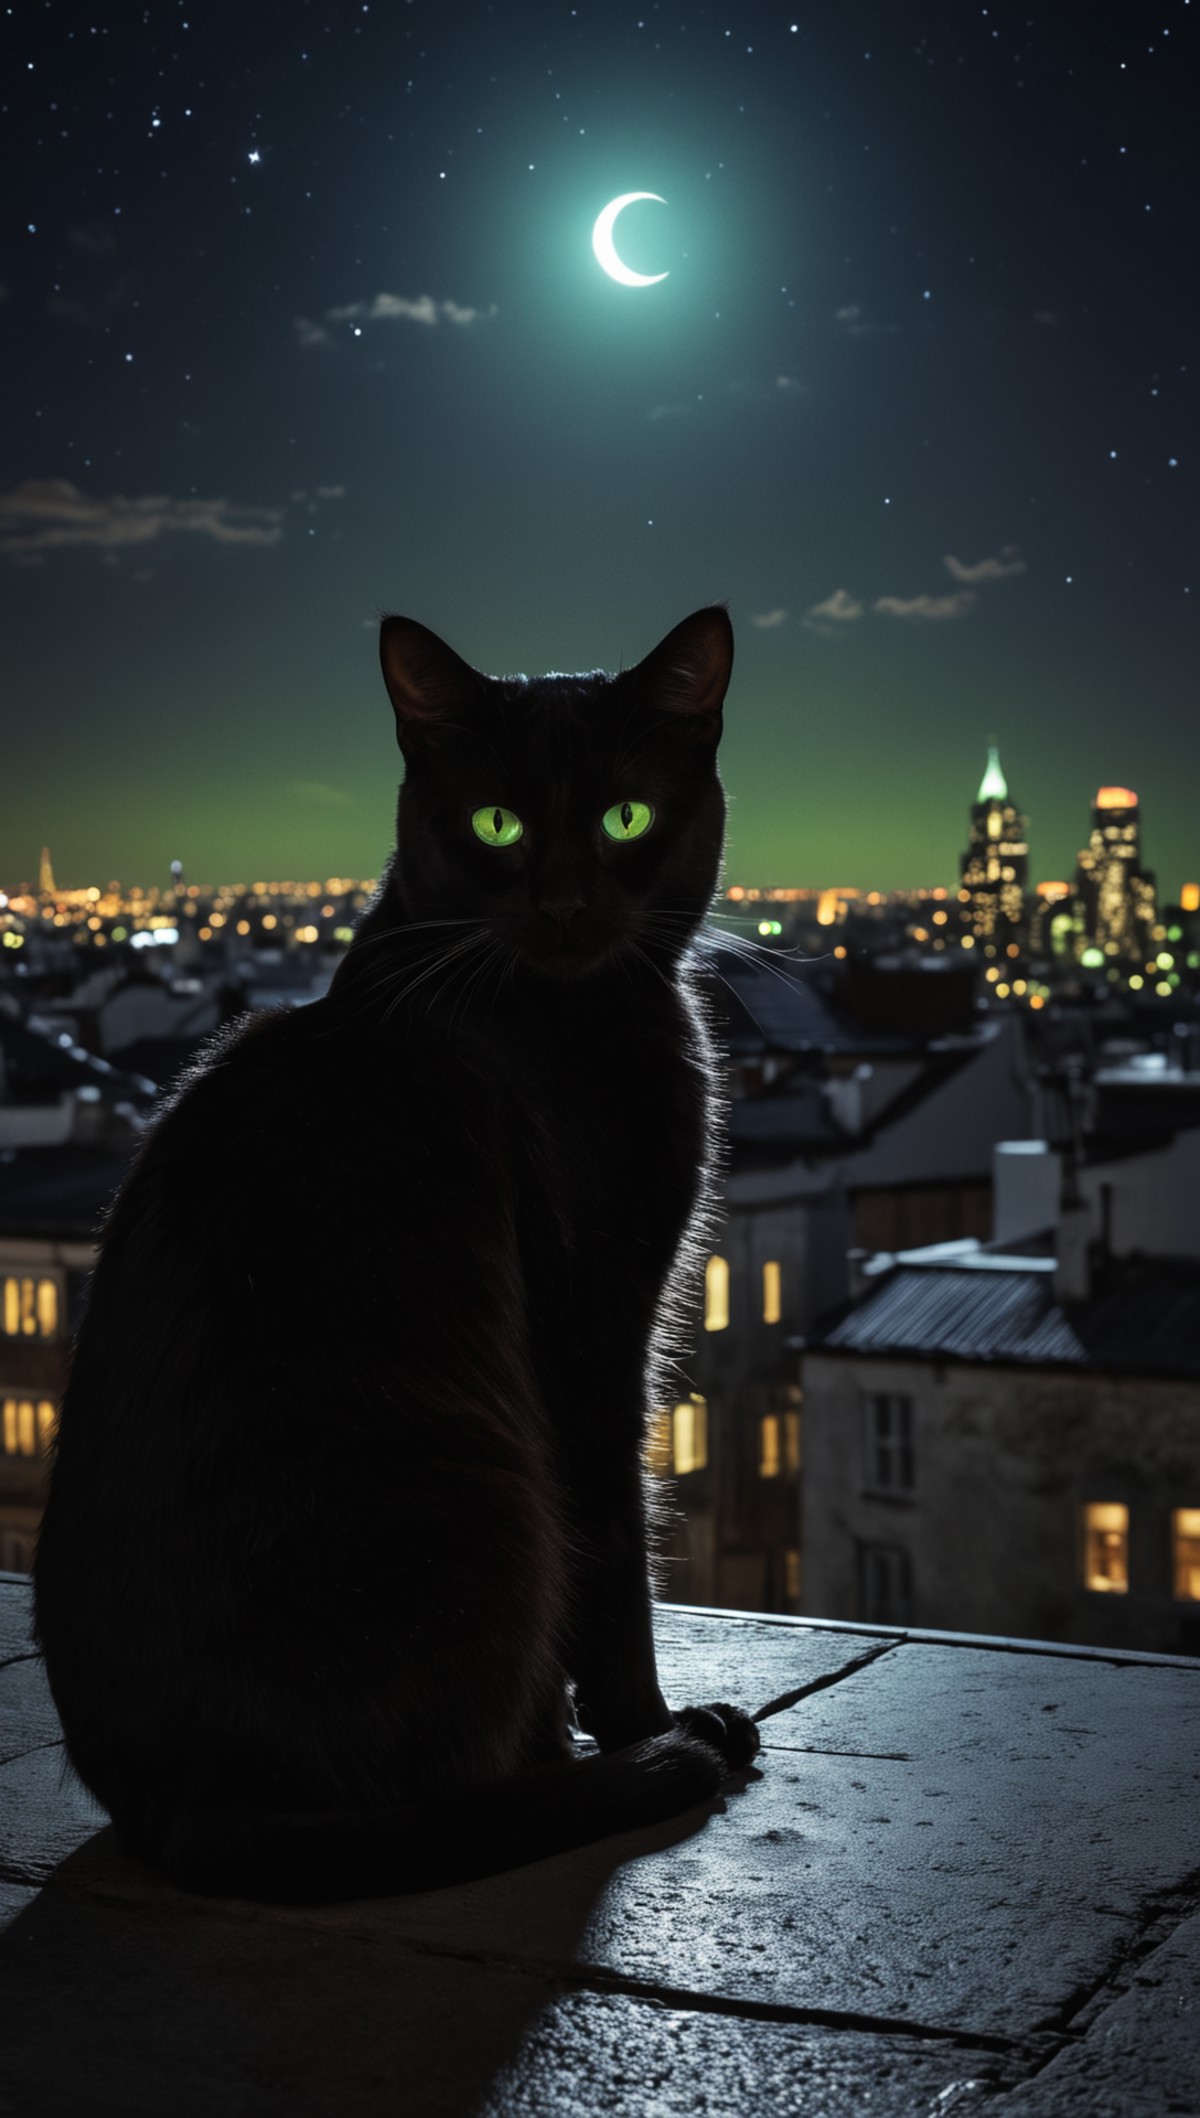 A (black cat:1.05) with bright green eyes sitting on a rooftop at night, under a full moon, surrounded by twinkling stars ...